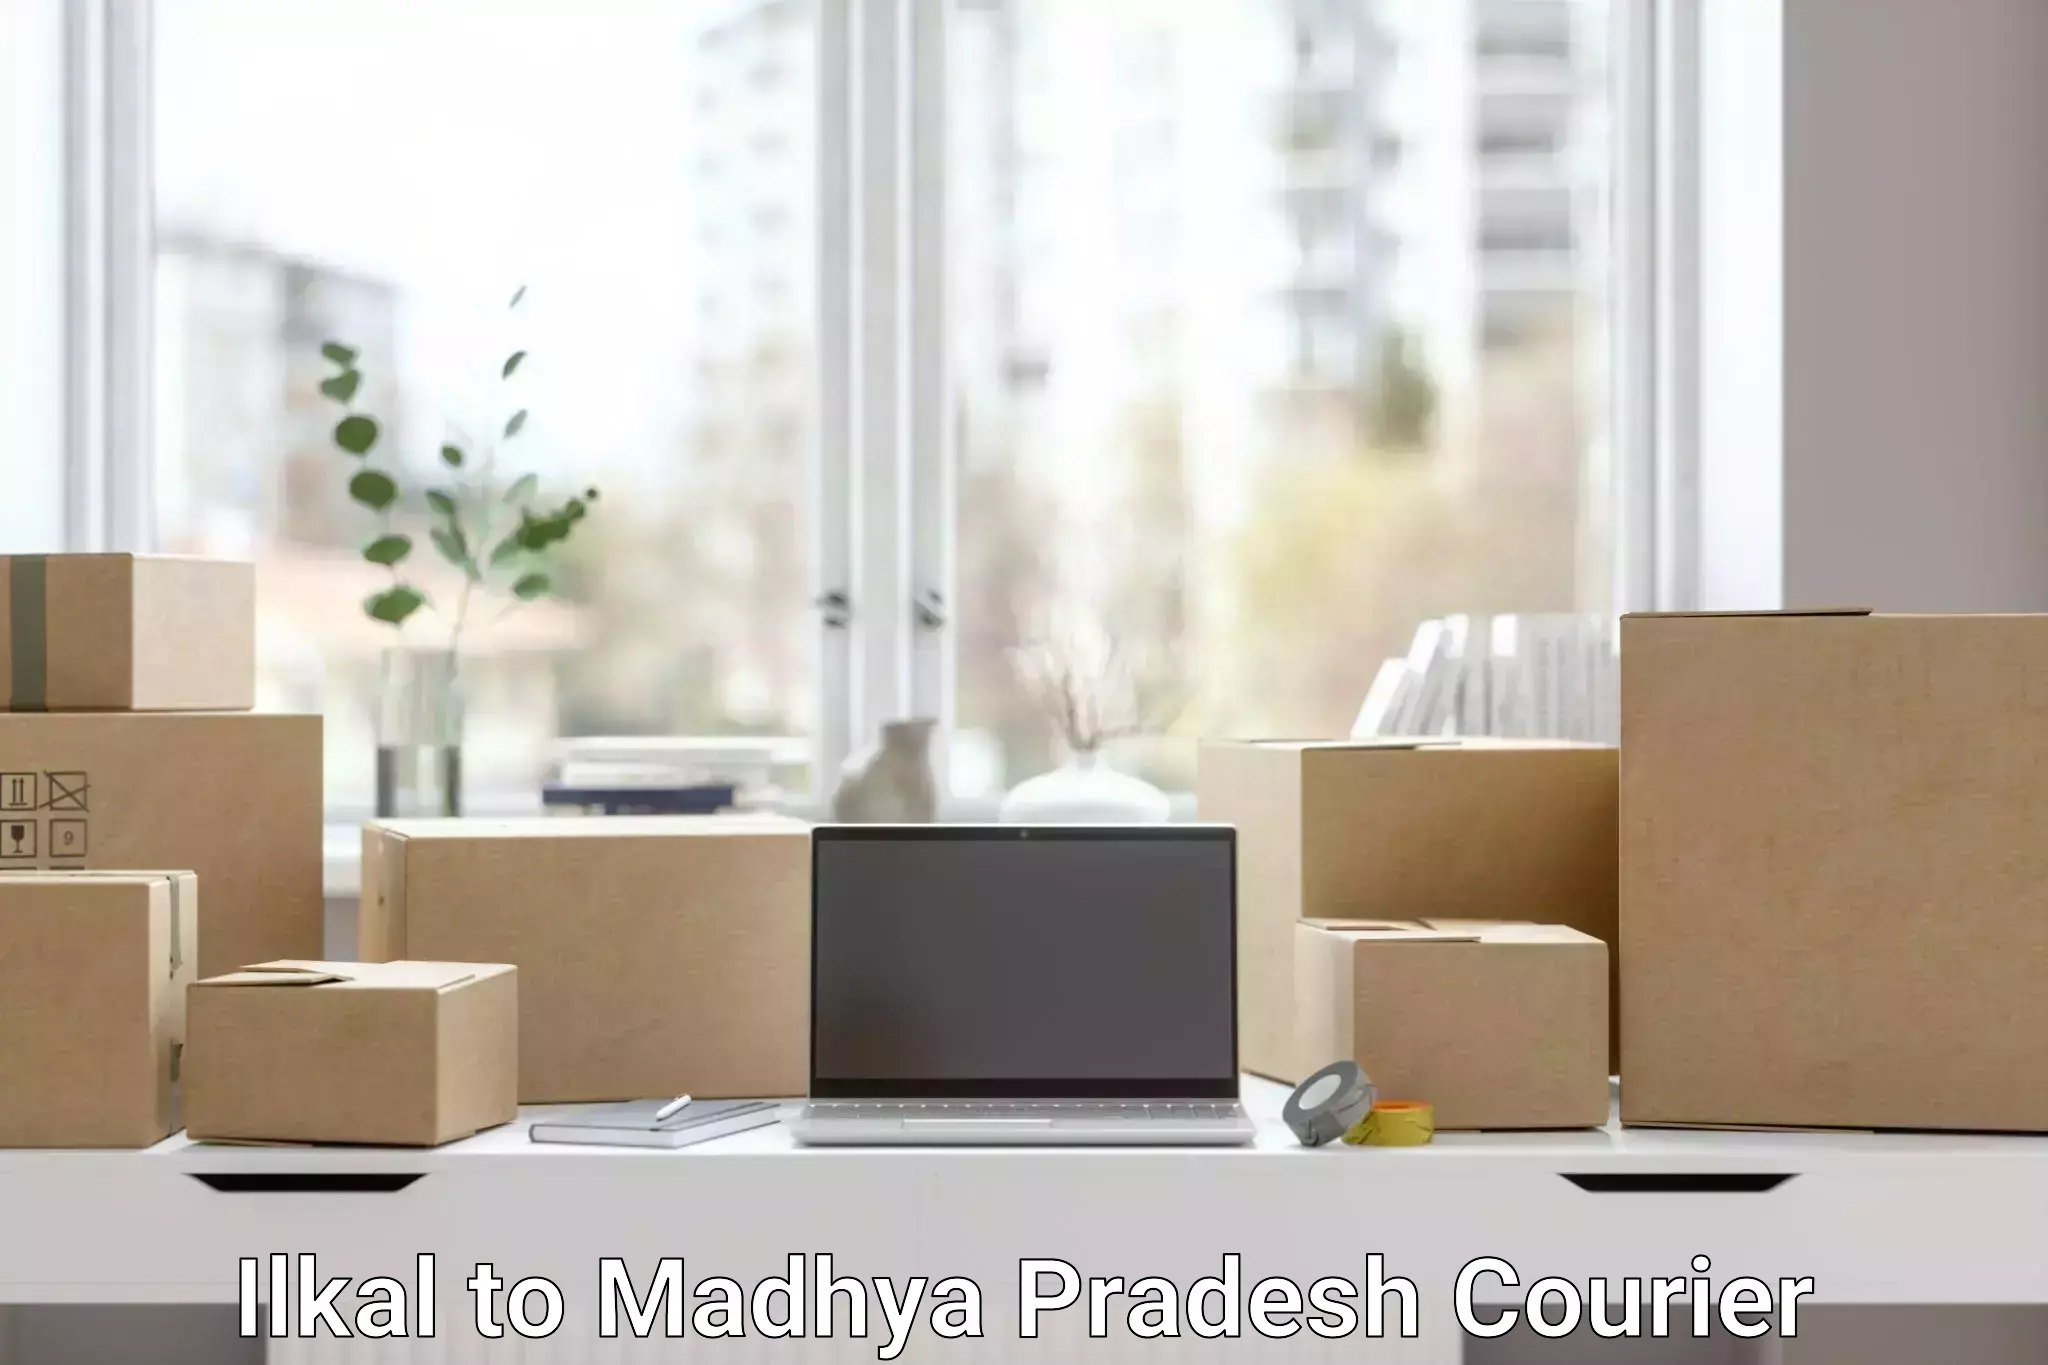 Courier service partnerships in Ilkal to Madhya Pradesh